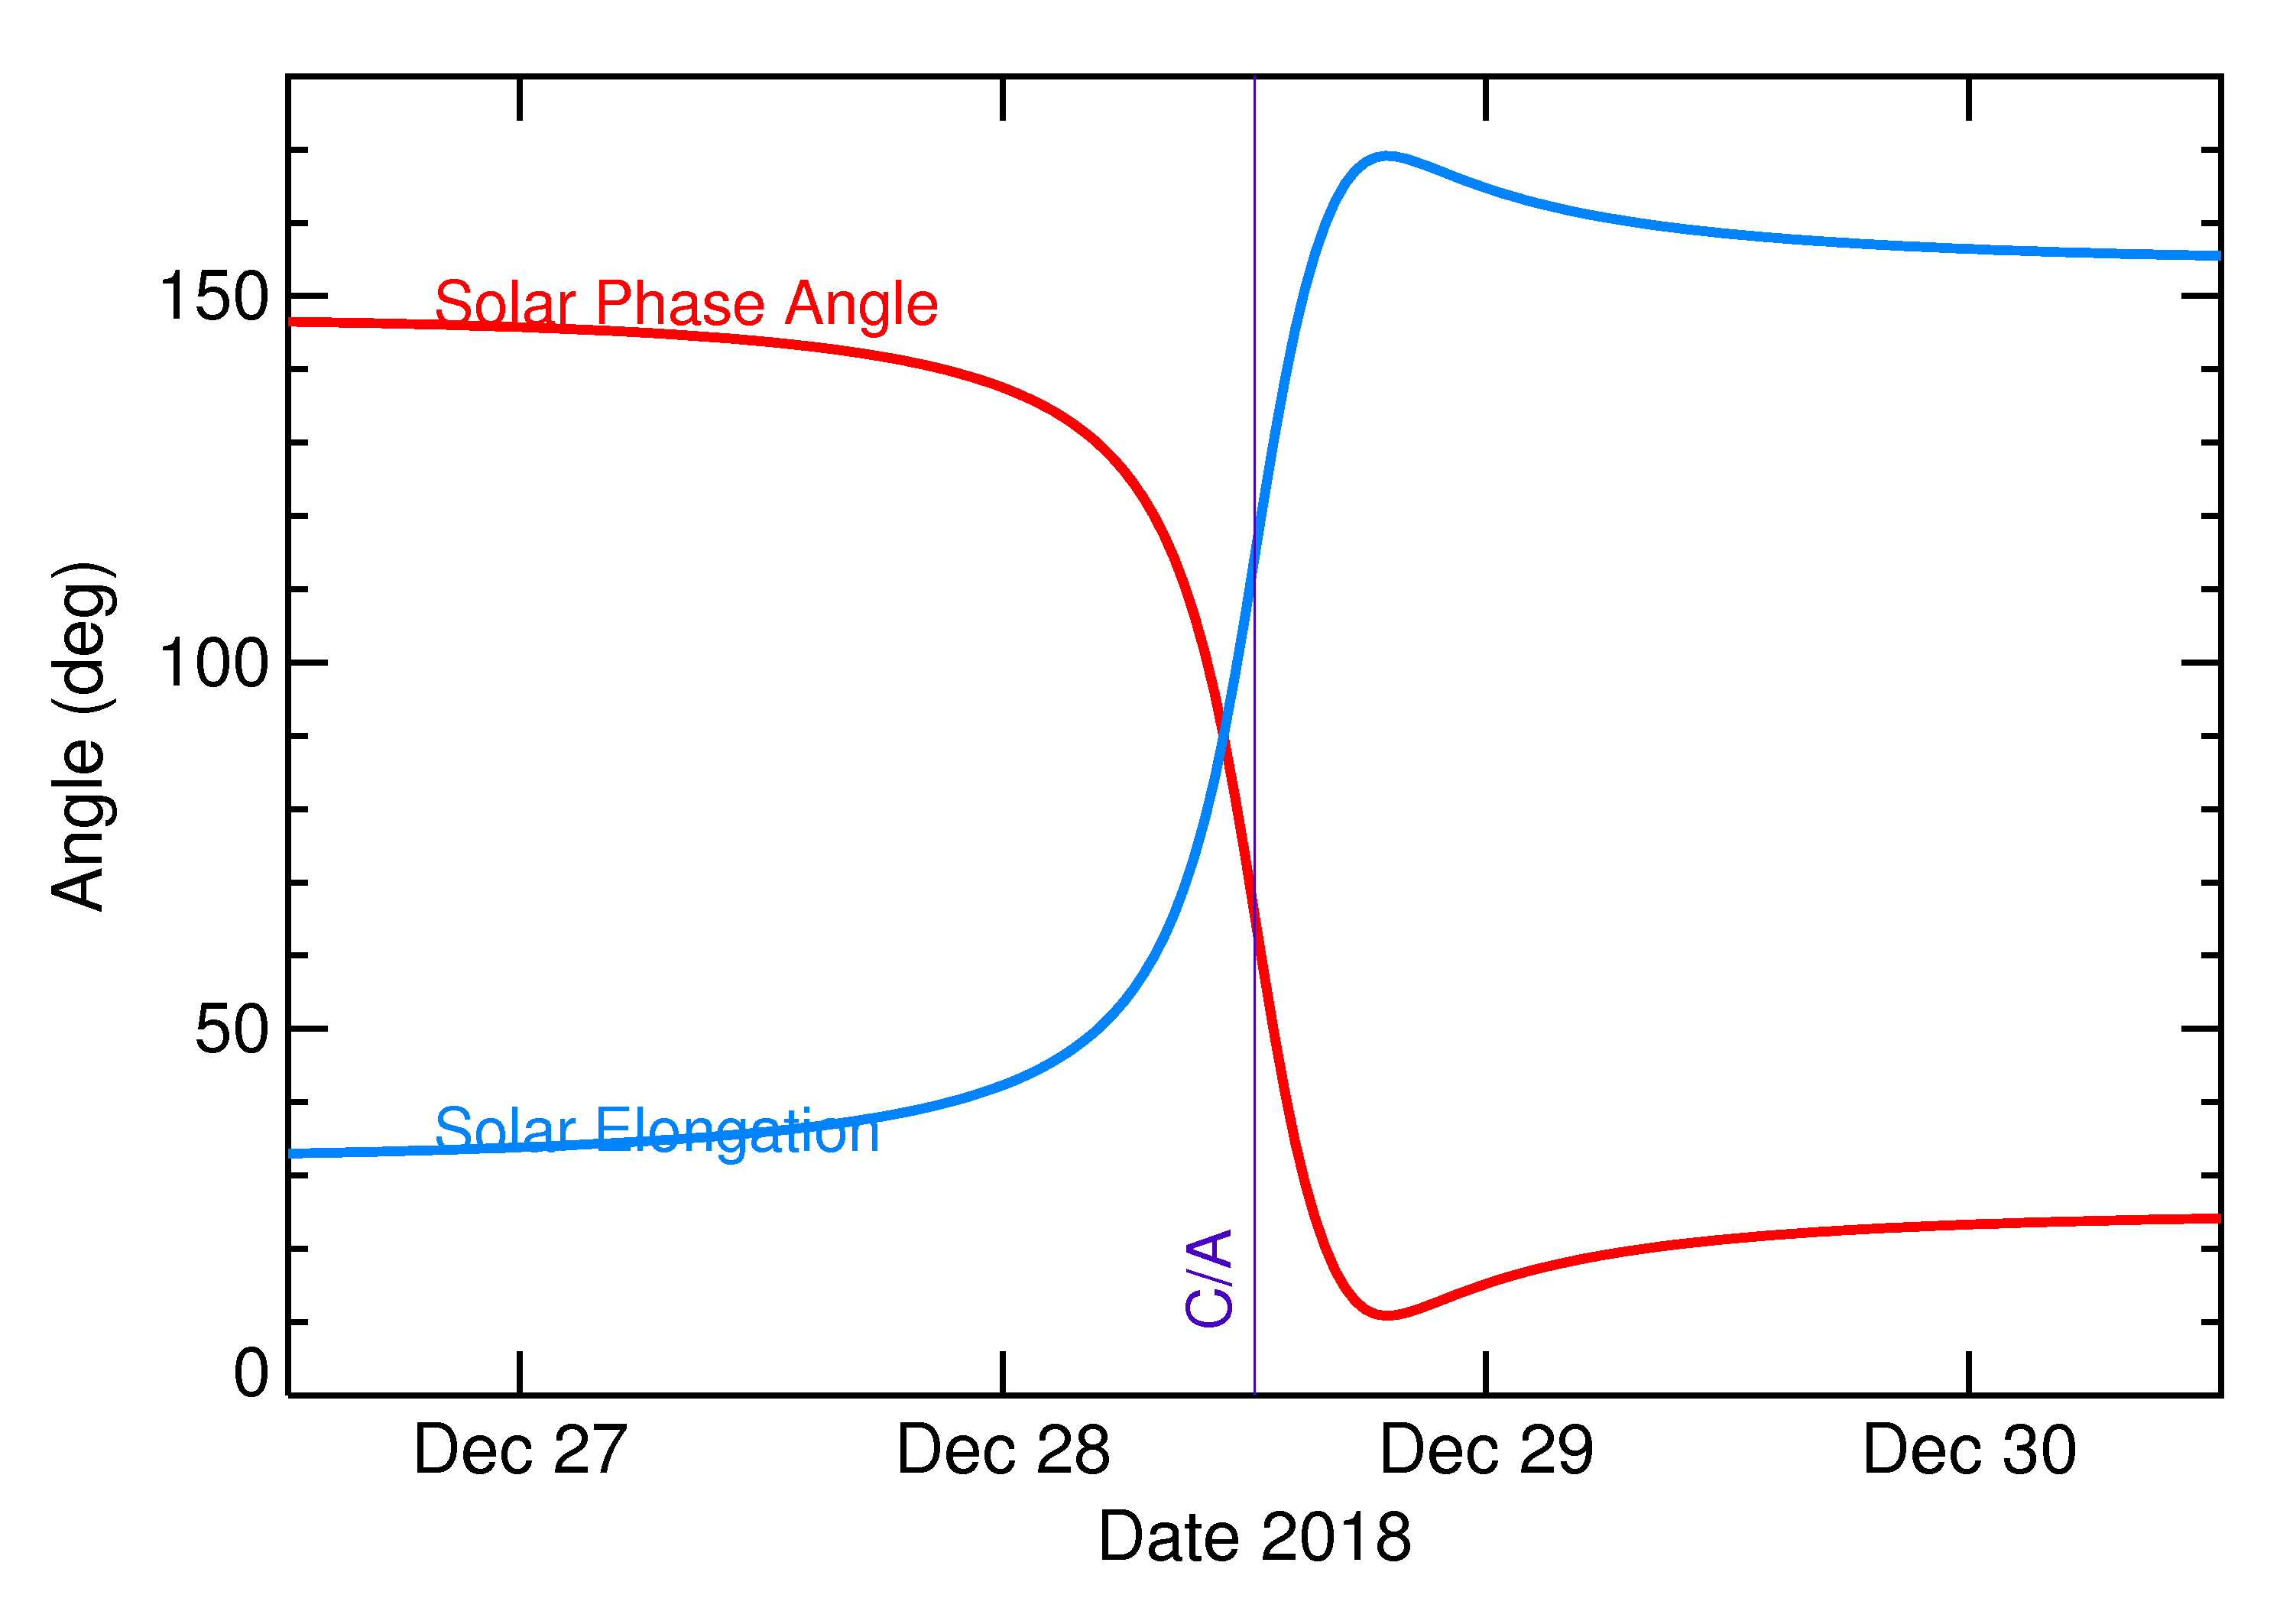 Solar Elongation and Solar Phase Angle of 2019 AW2 in the days around closest approach